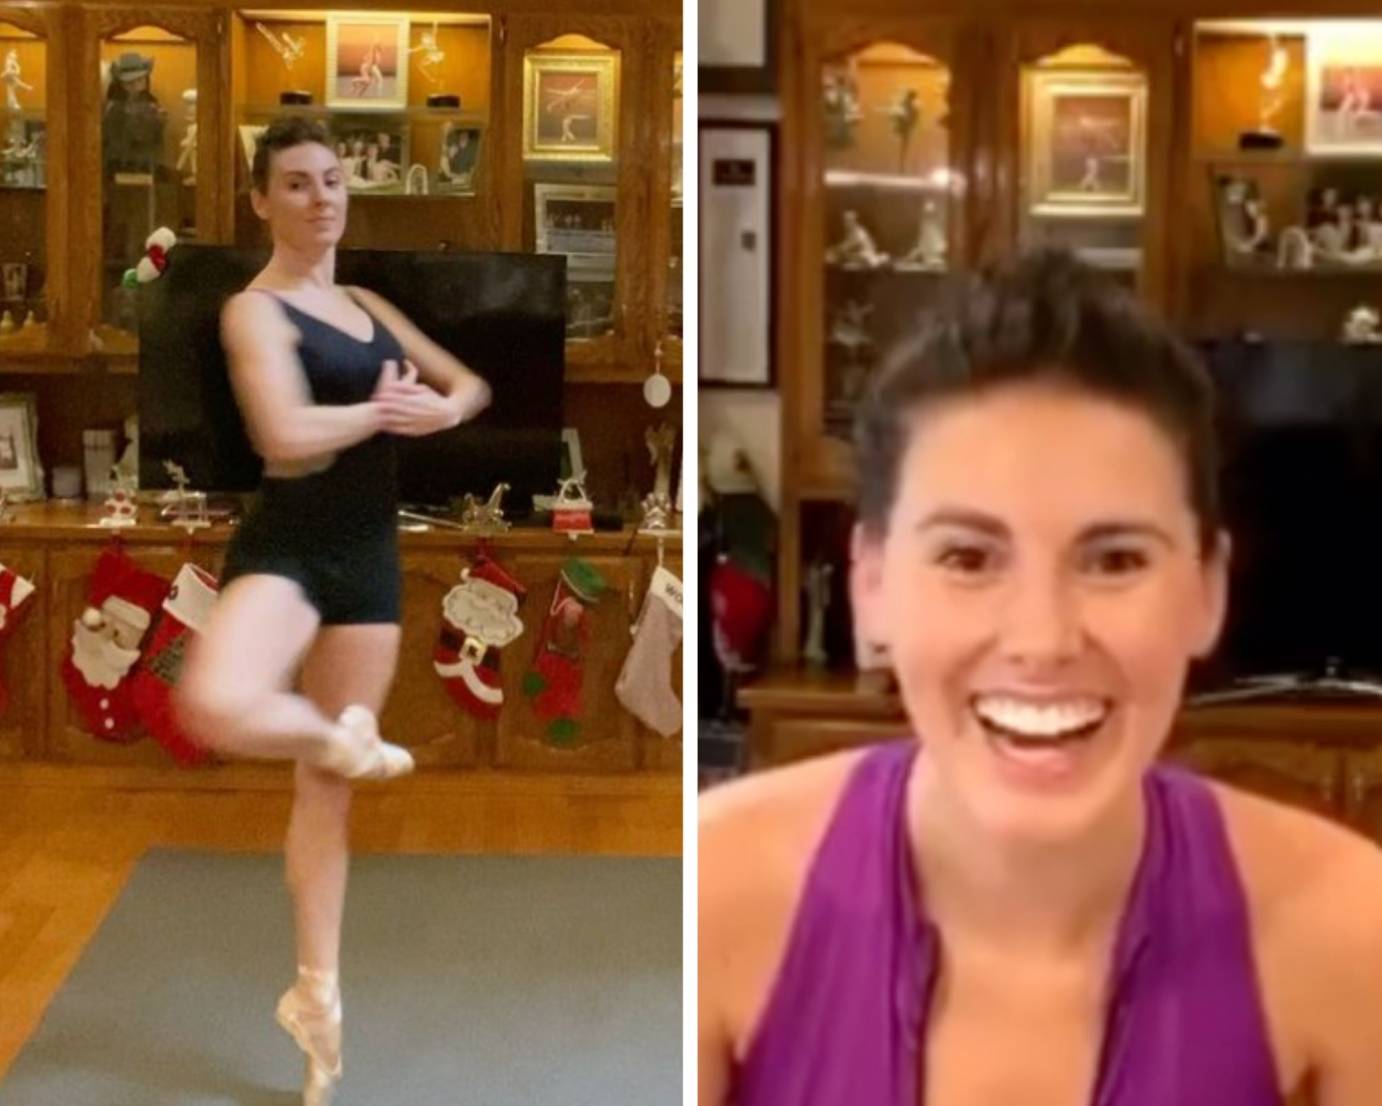 Two picture: on the left is Tiler  Peck doing a pirouette in her  parents' living room; in the second, she is in a purple leotard looking into the camera